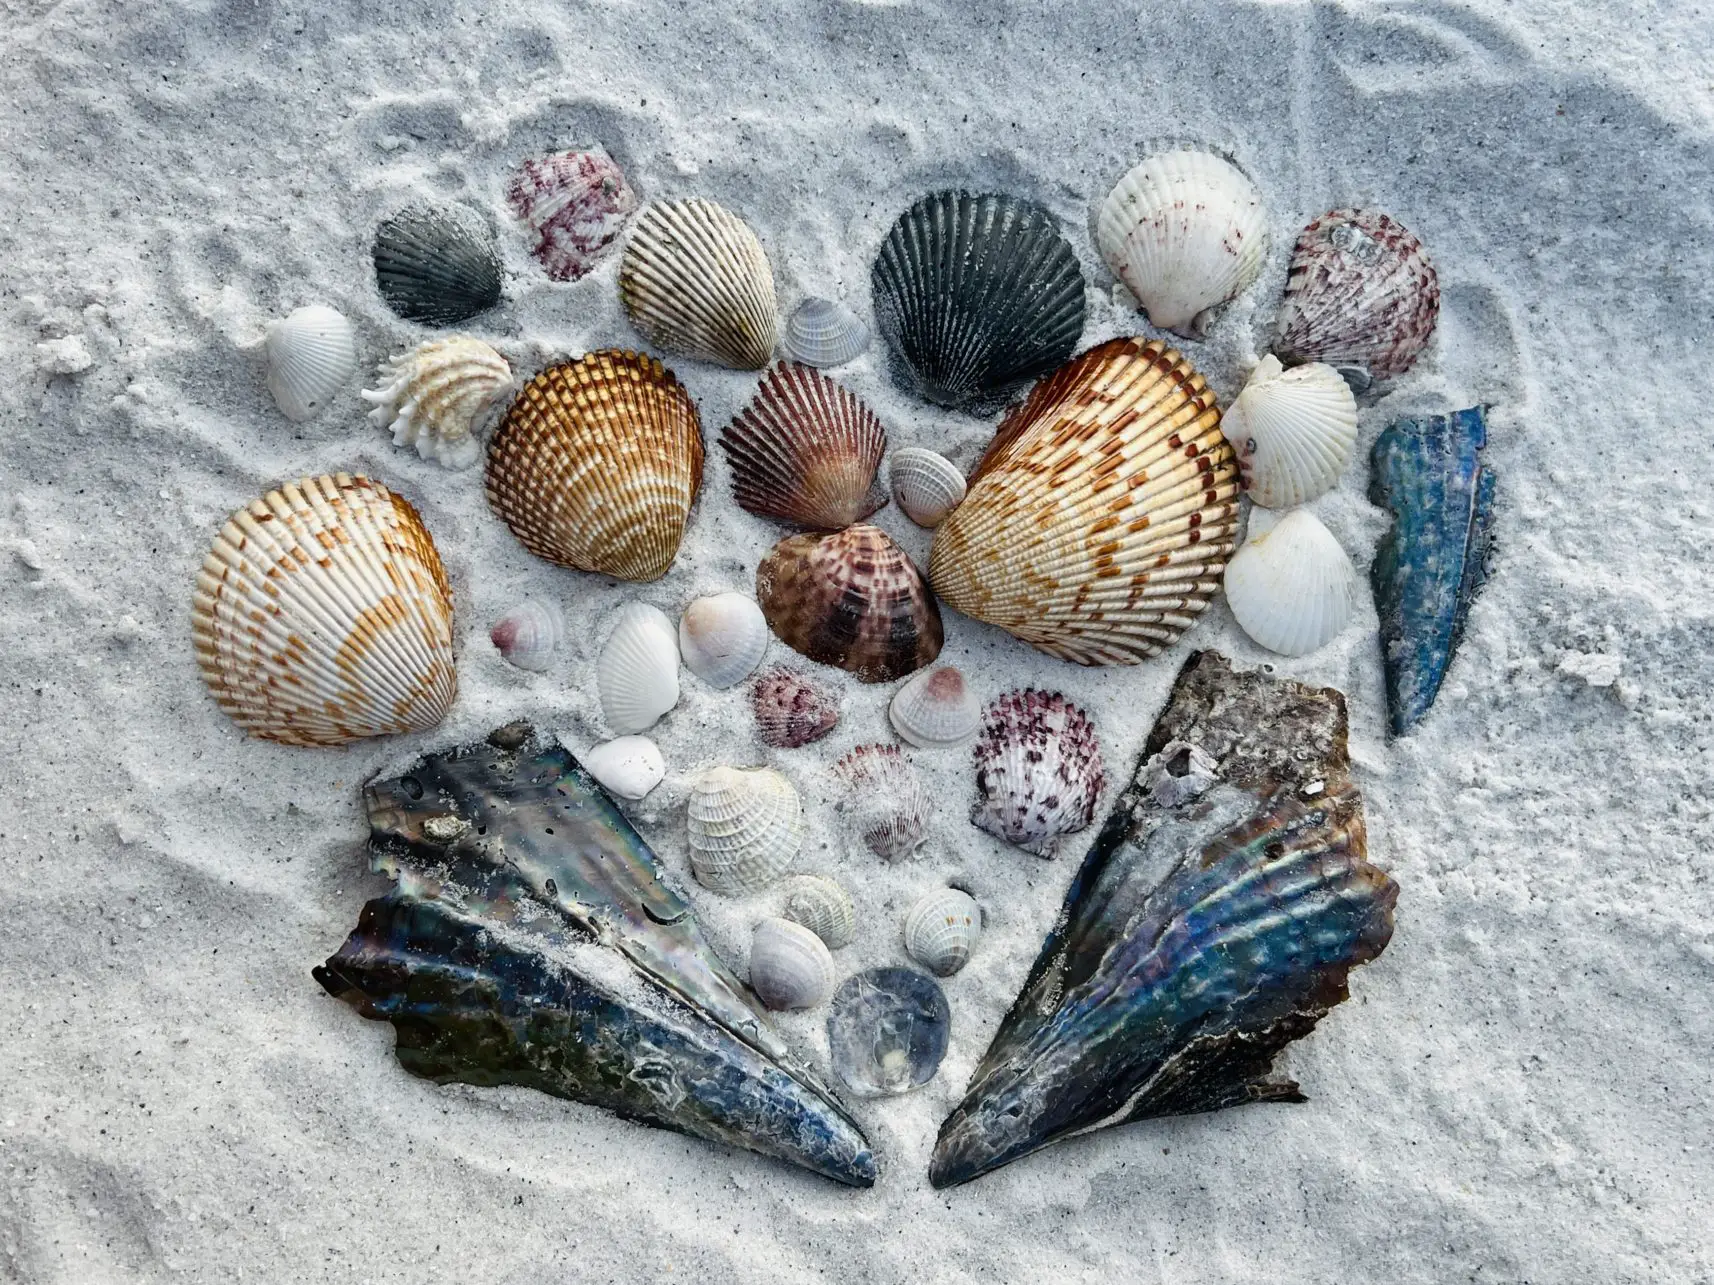 Colorful shells on the beach at St Pete Beach, Florida, USA.